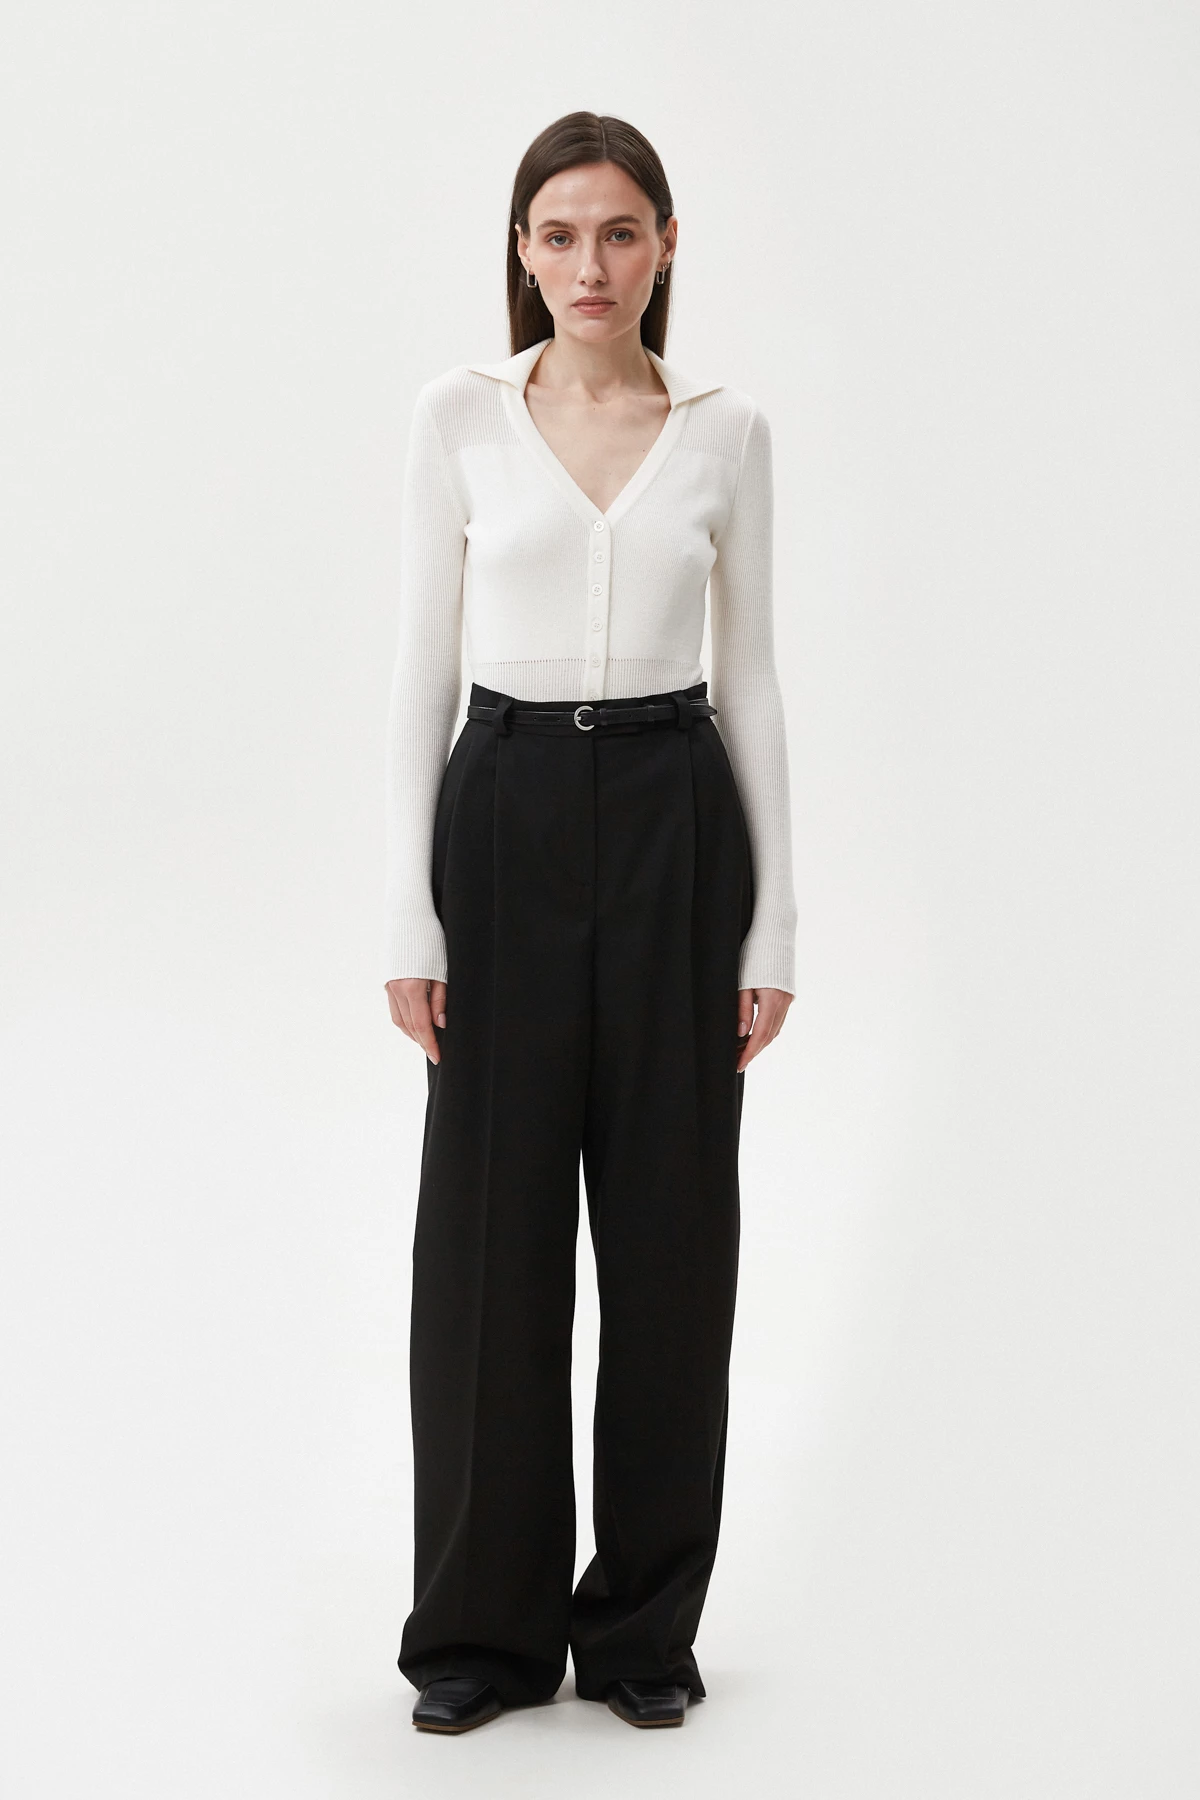 Black loose fit pants made of viscose suit fabric, photo 1